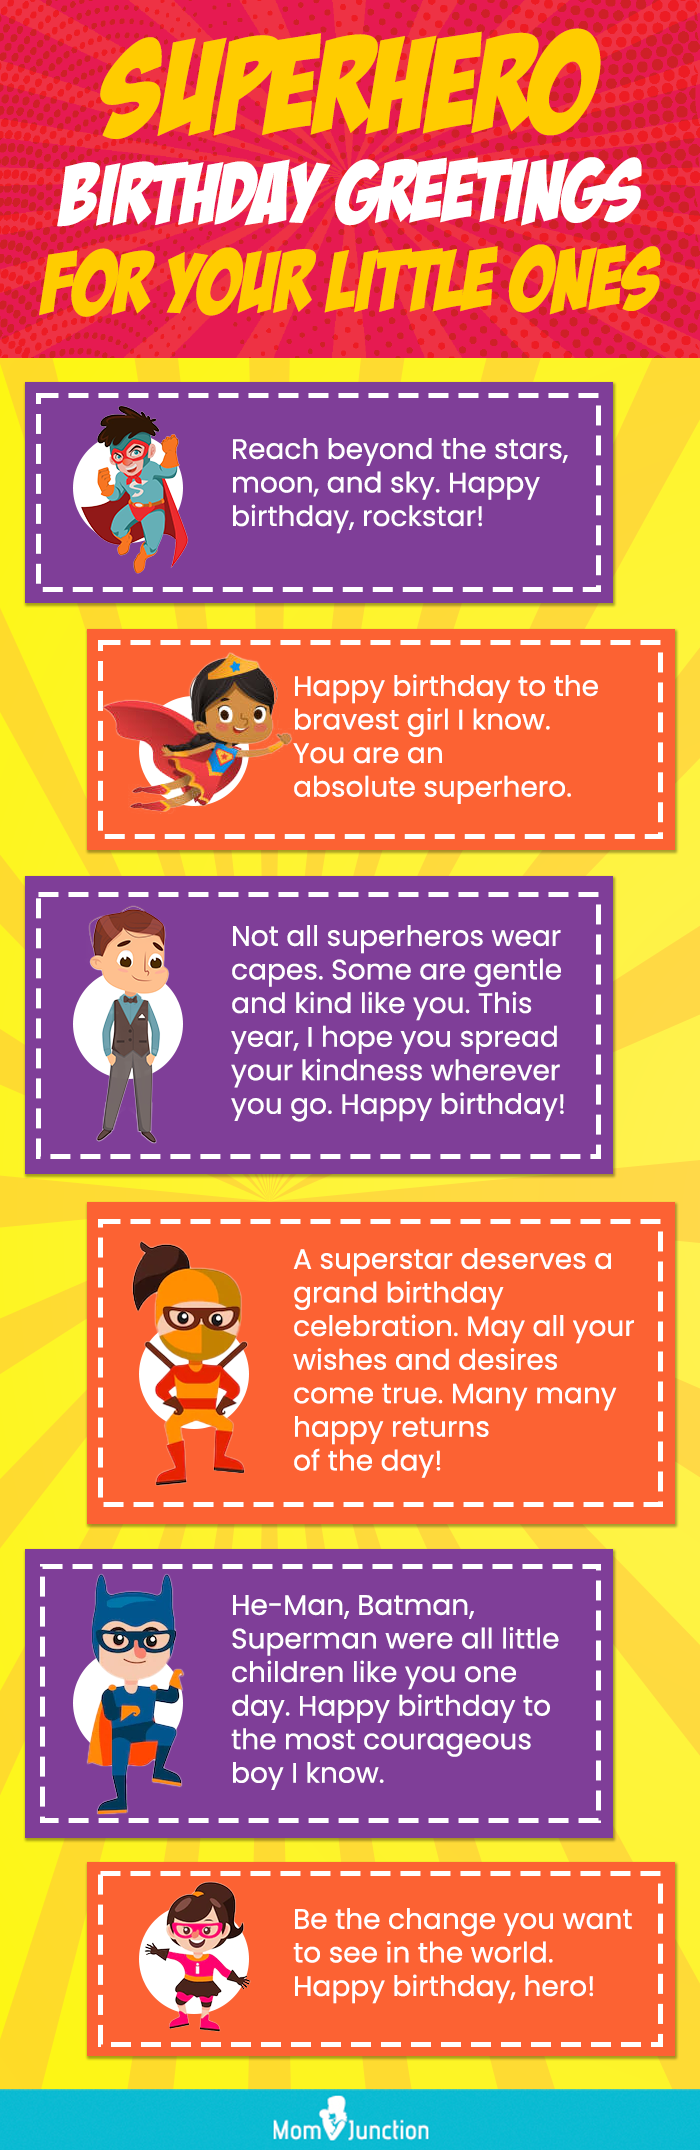 superhero birthday greetings for your little ones (infographic)